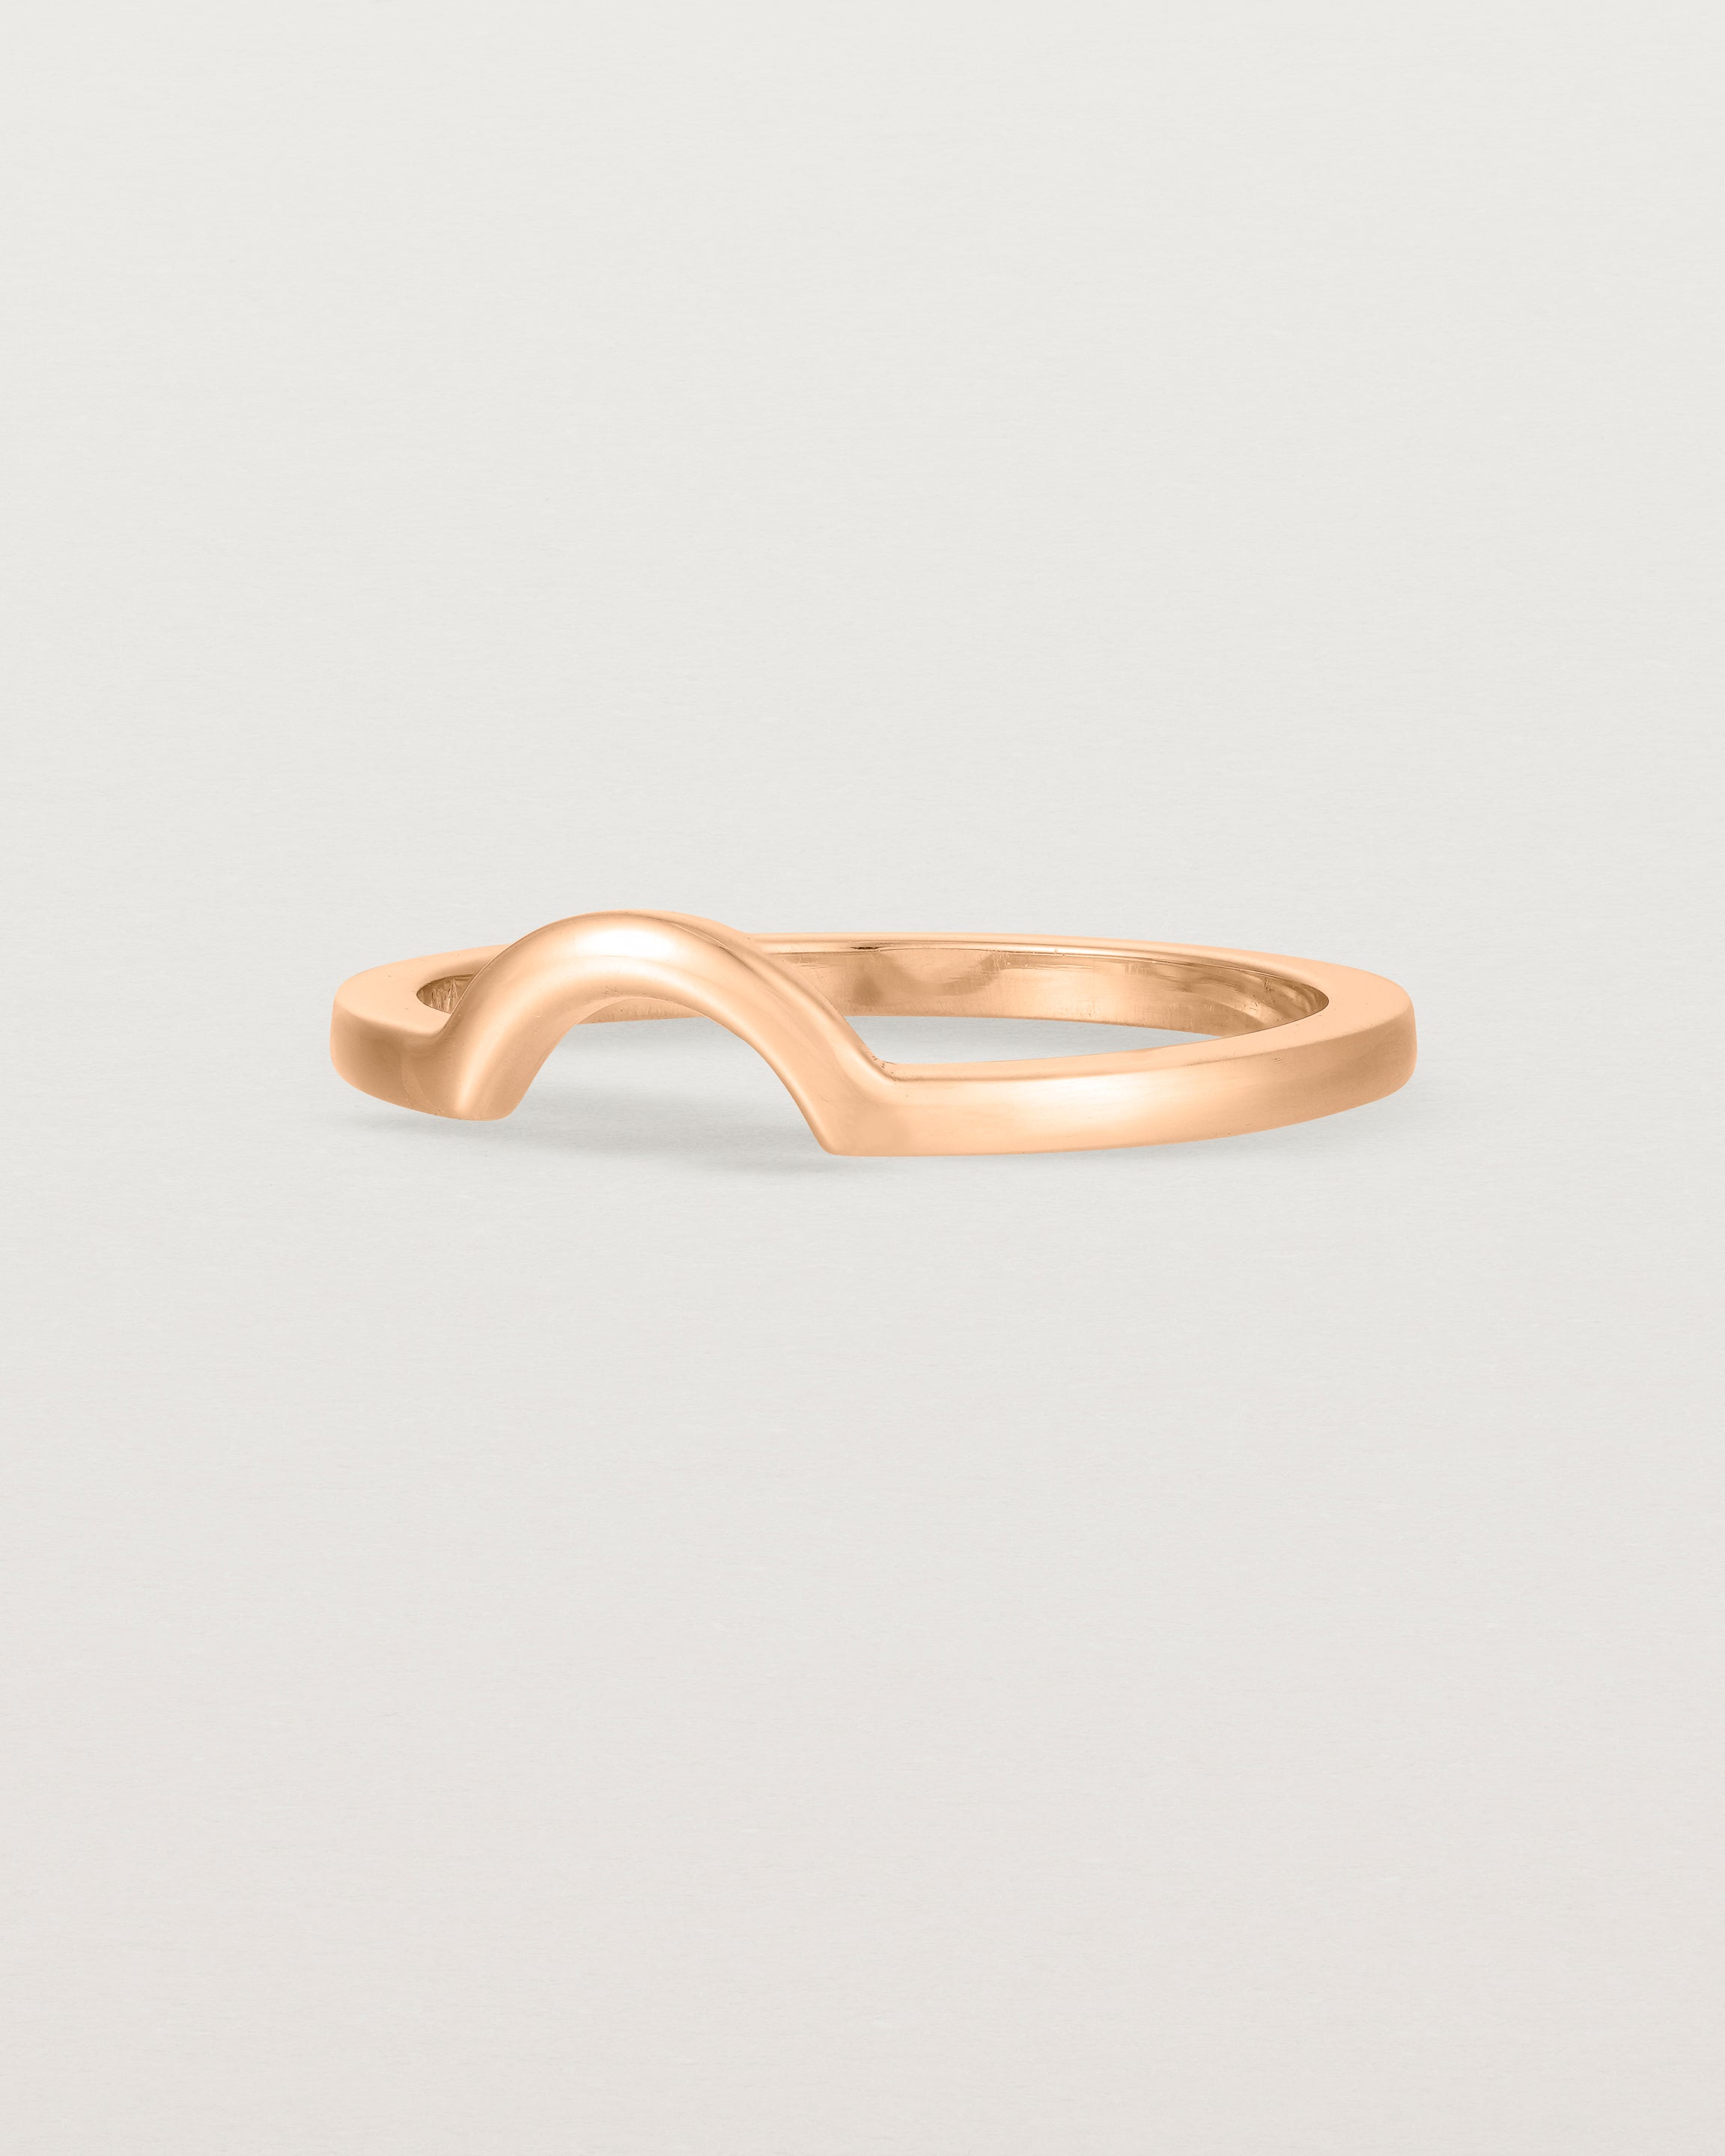 A classic small arc crown ring crafted in rose gold